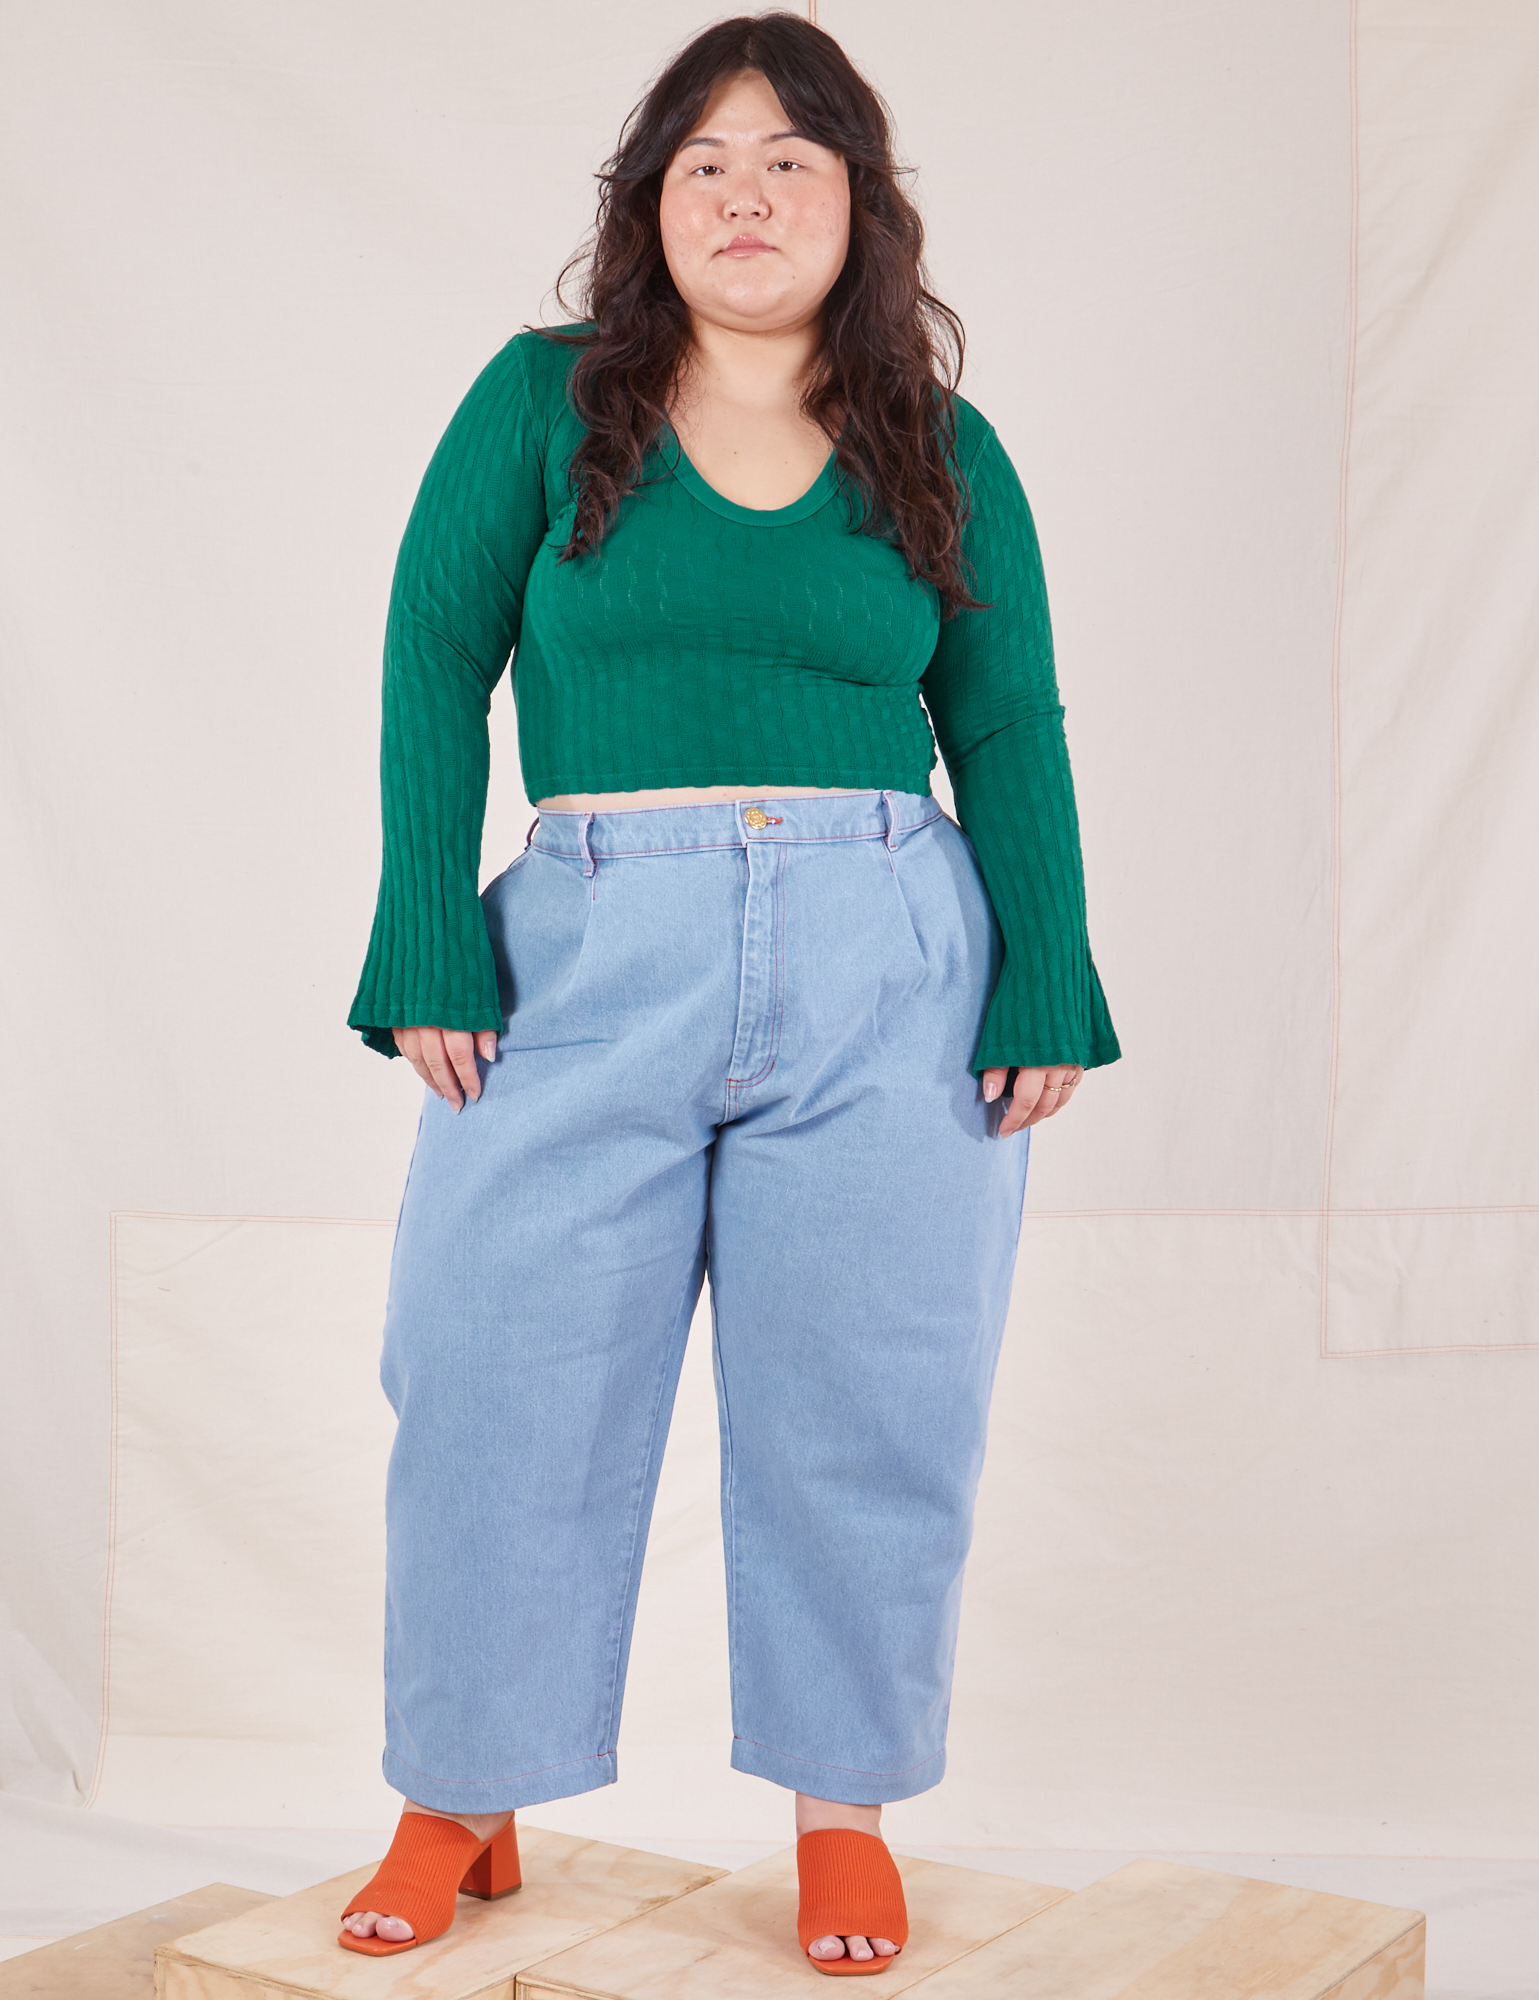 Ashley is wearing Bell Sleeve Top in Hunter Green and light wash Trouser Jeans